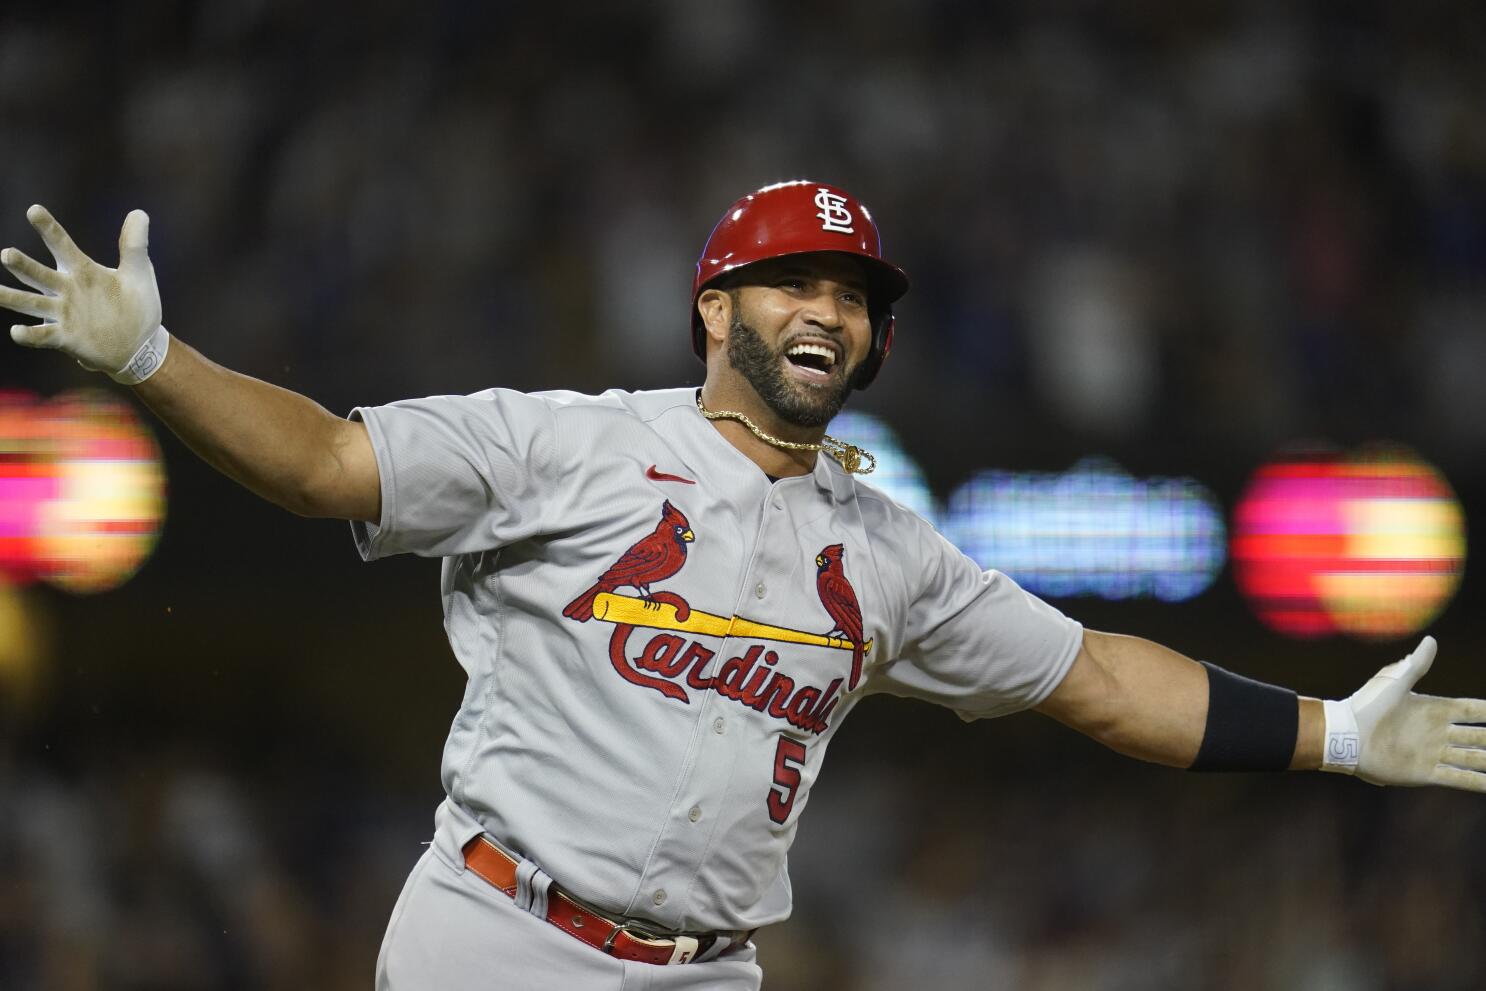 Cards' Pujols hits 700th home run, 4th player to reach mark - The San Diego  Union-Tribune